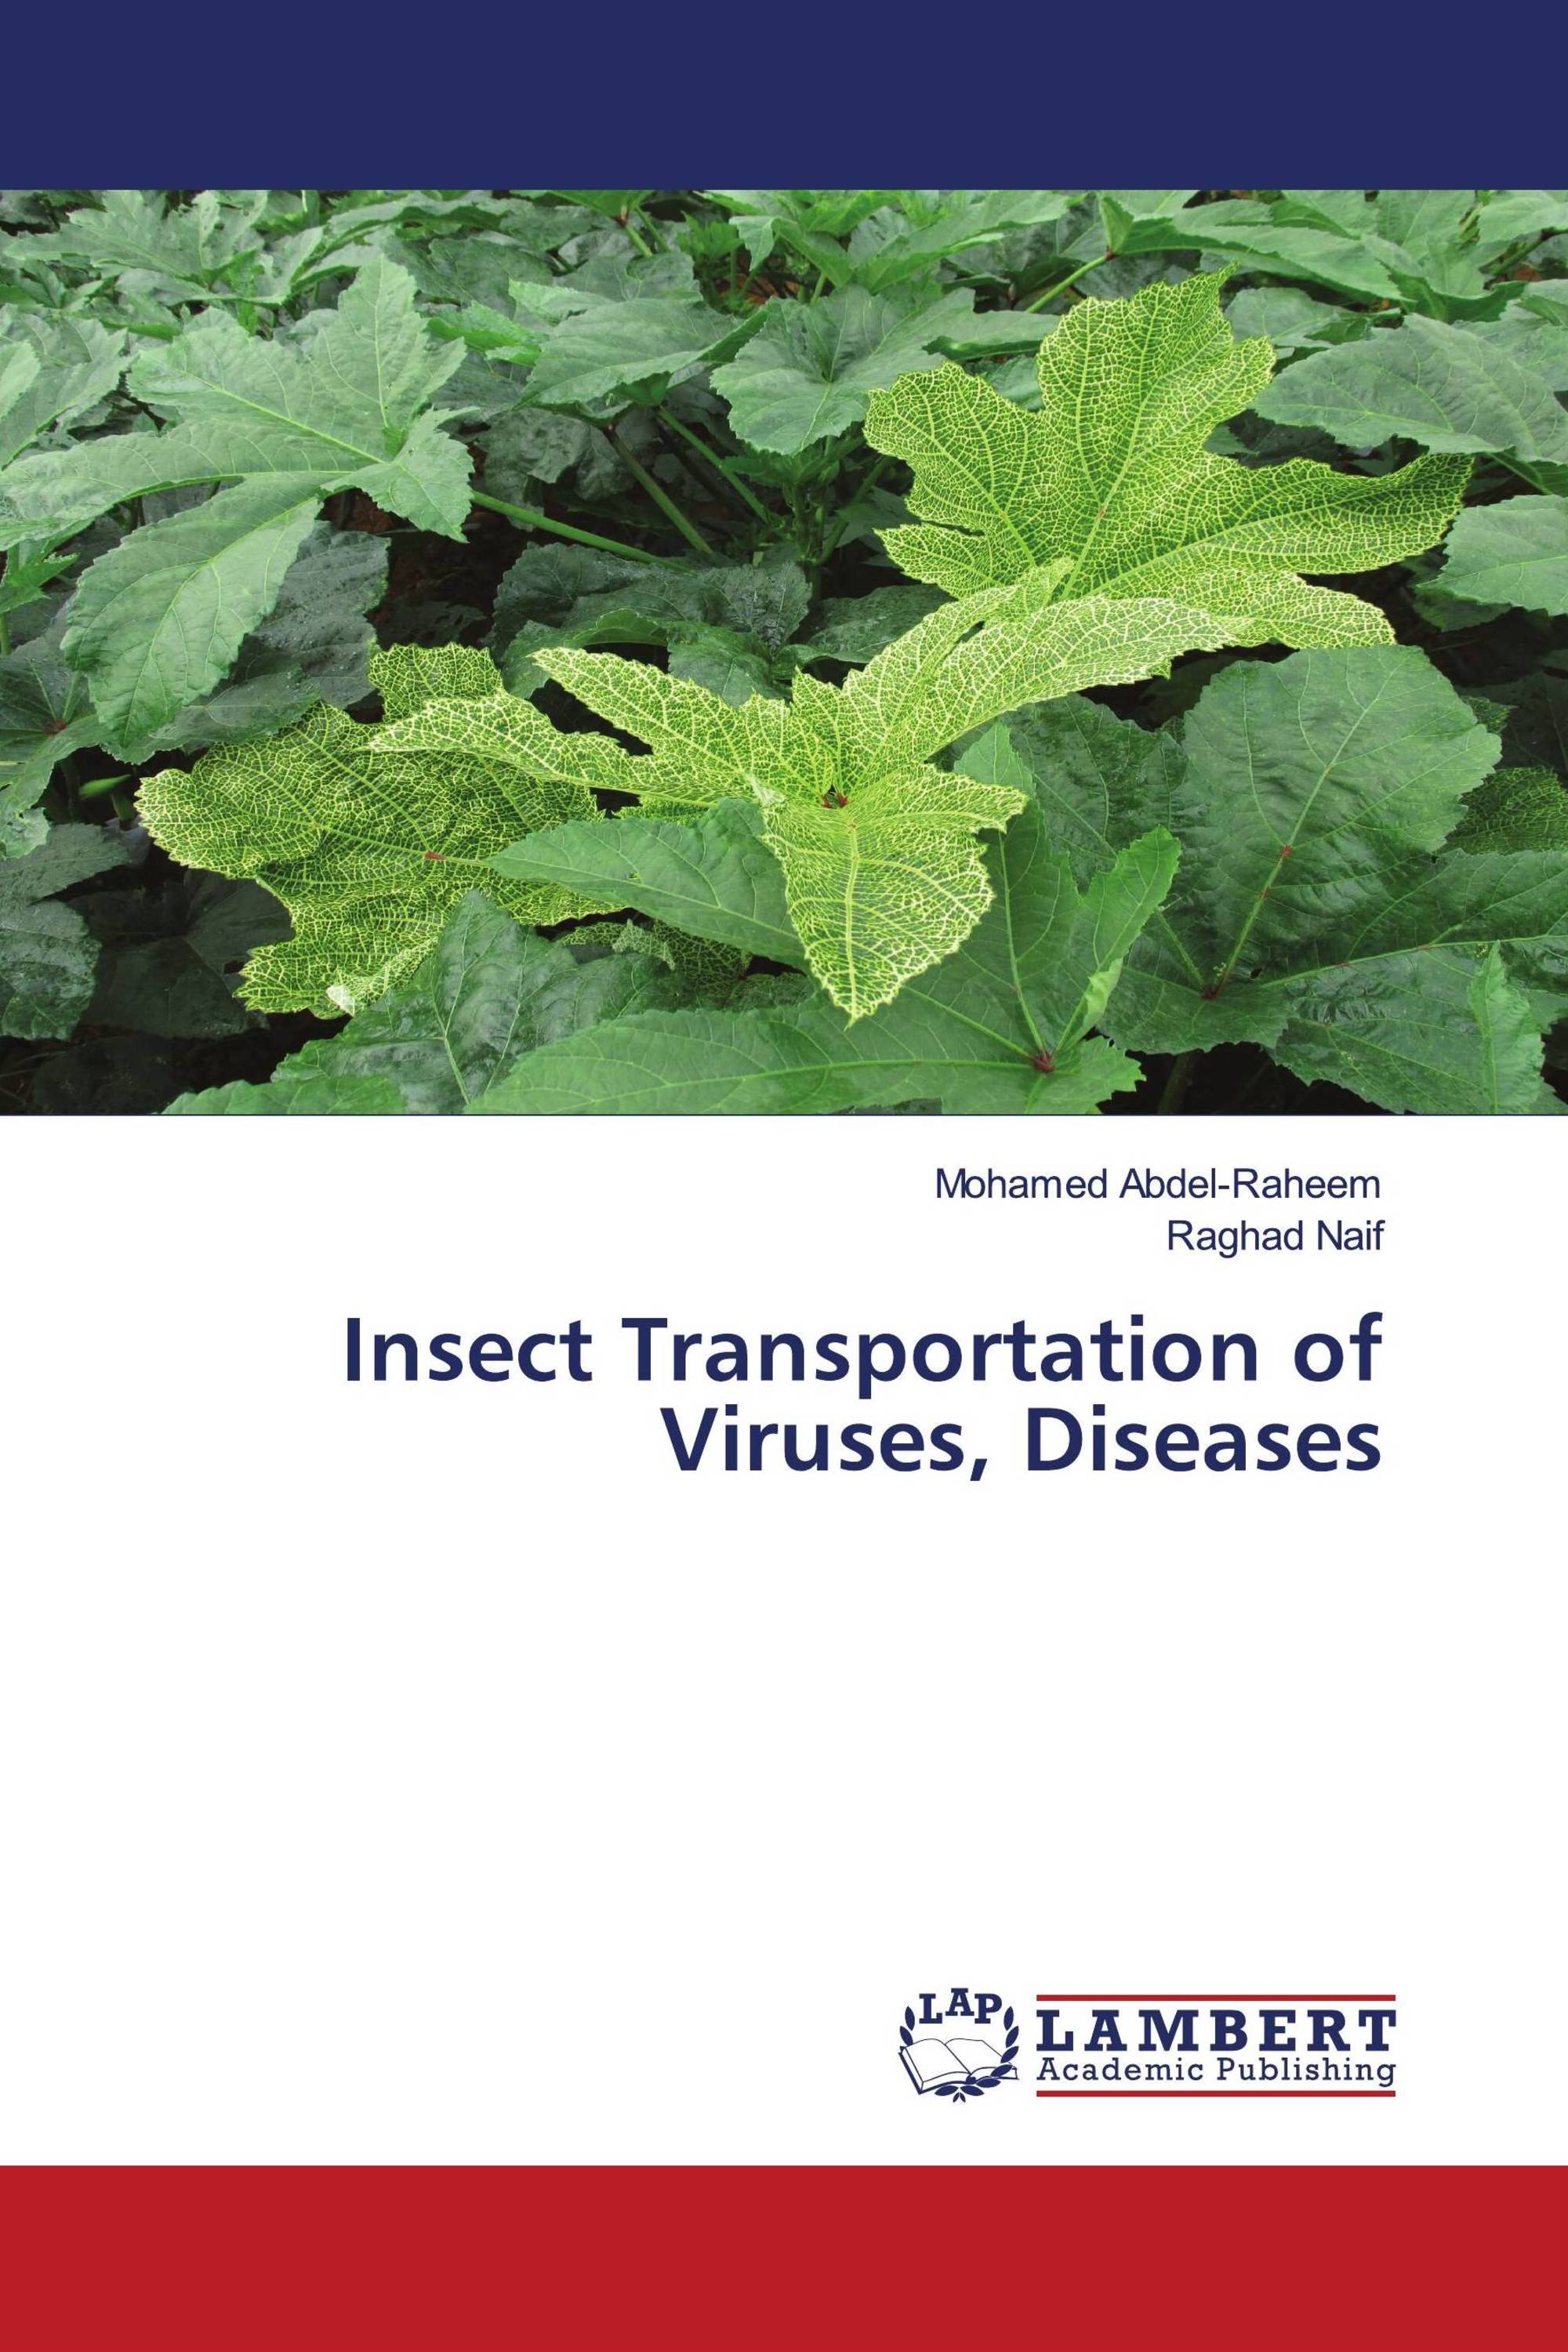 Insect Transportation of Viruses, Diseases